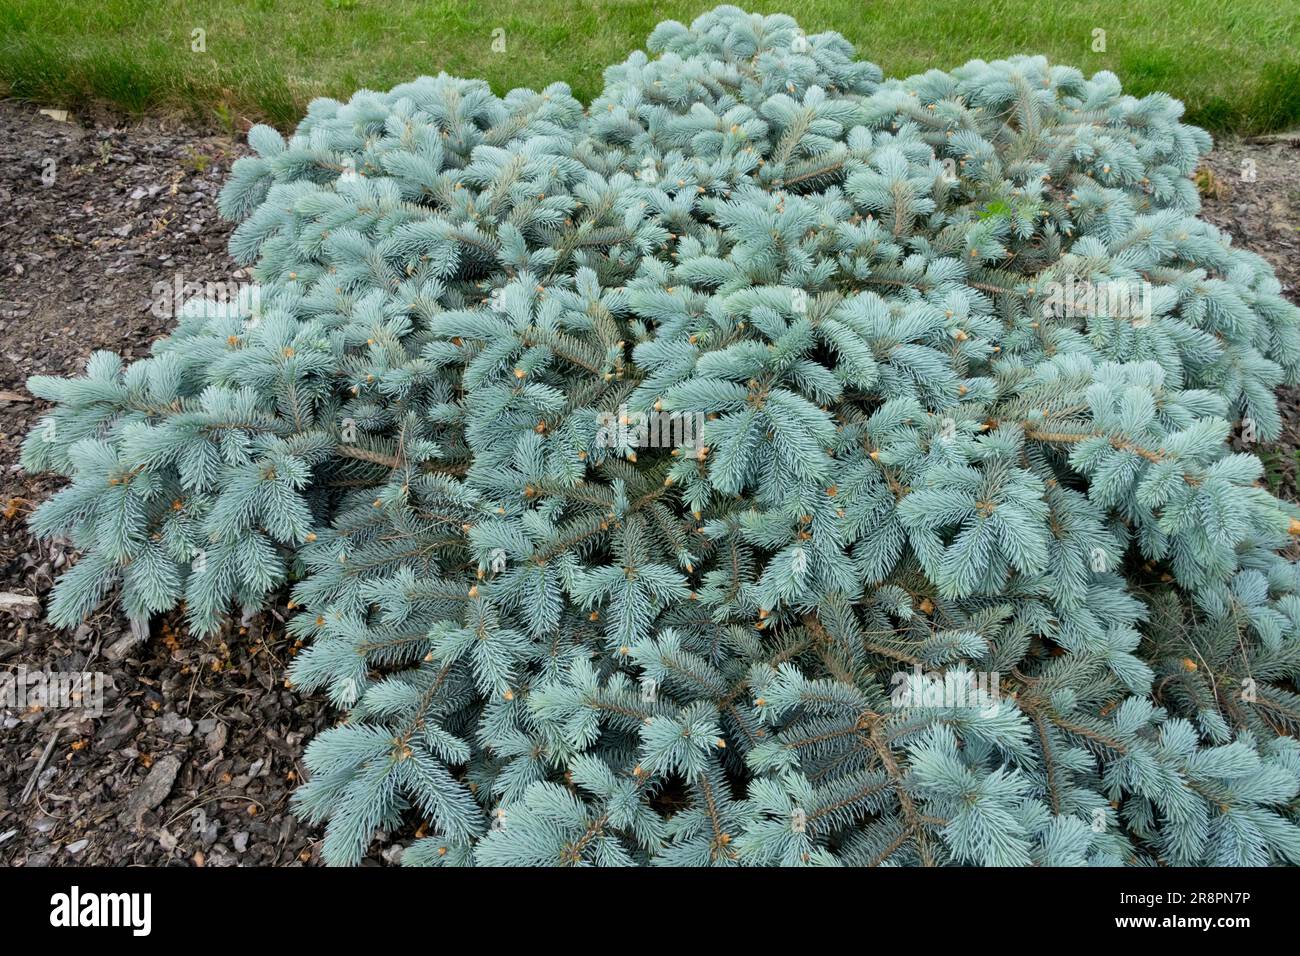 Colorado Blue Spruce, Picea pungens 'Repens' Stock Photo